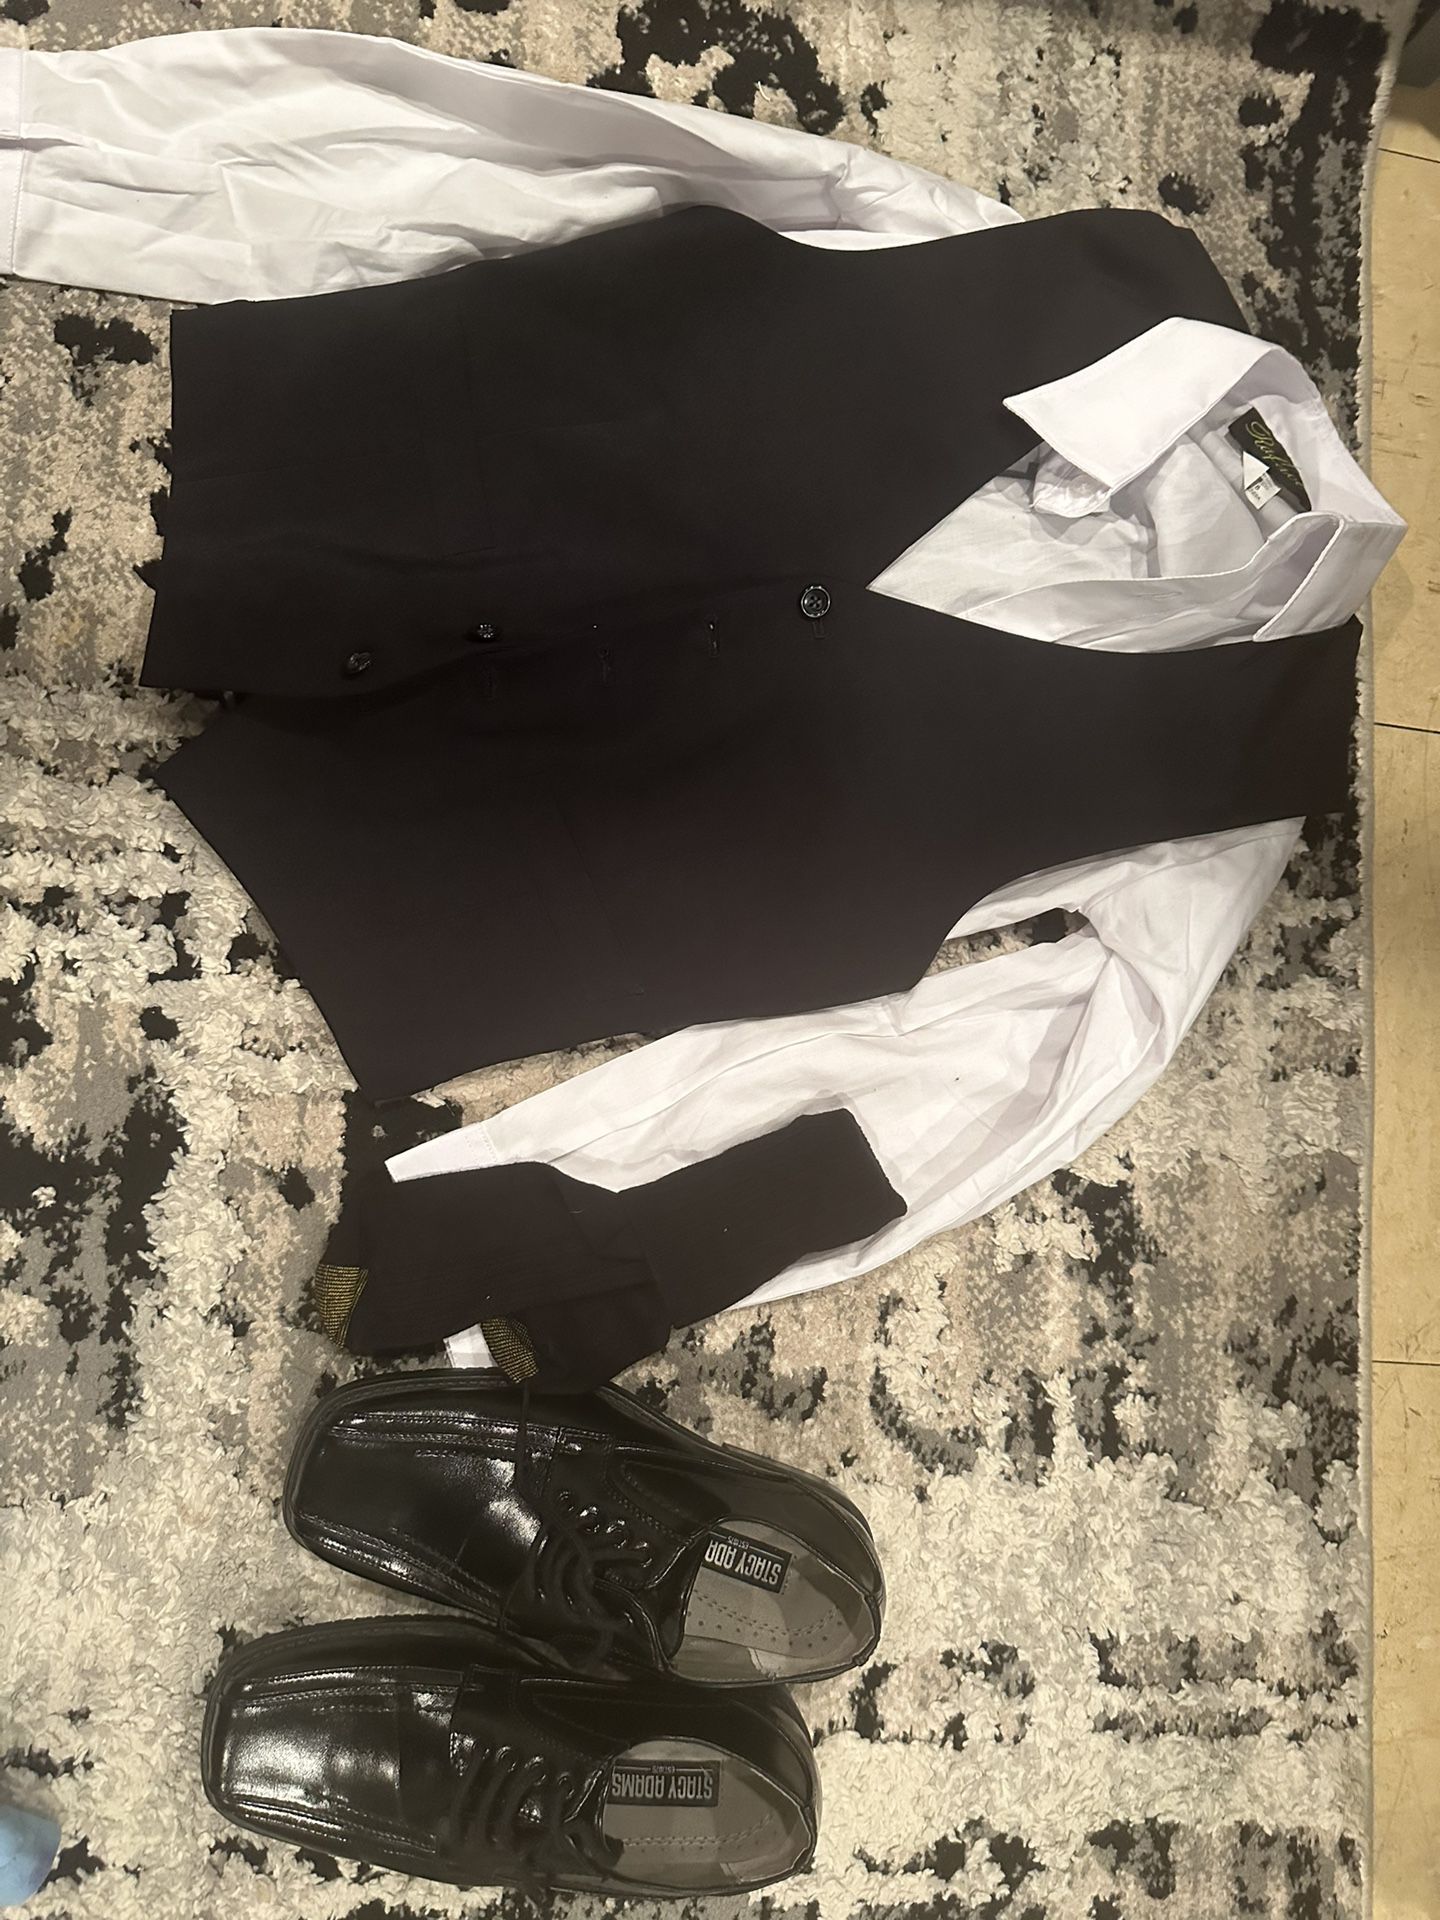 Boys Size 8 Shirt And Best Wedding Formal Attire Dress Shoes Size 1 And Long Socks 